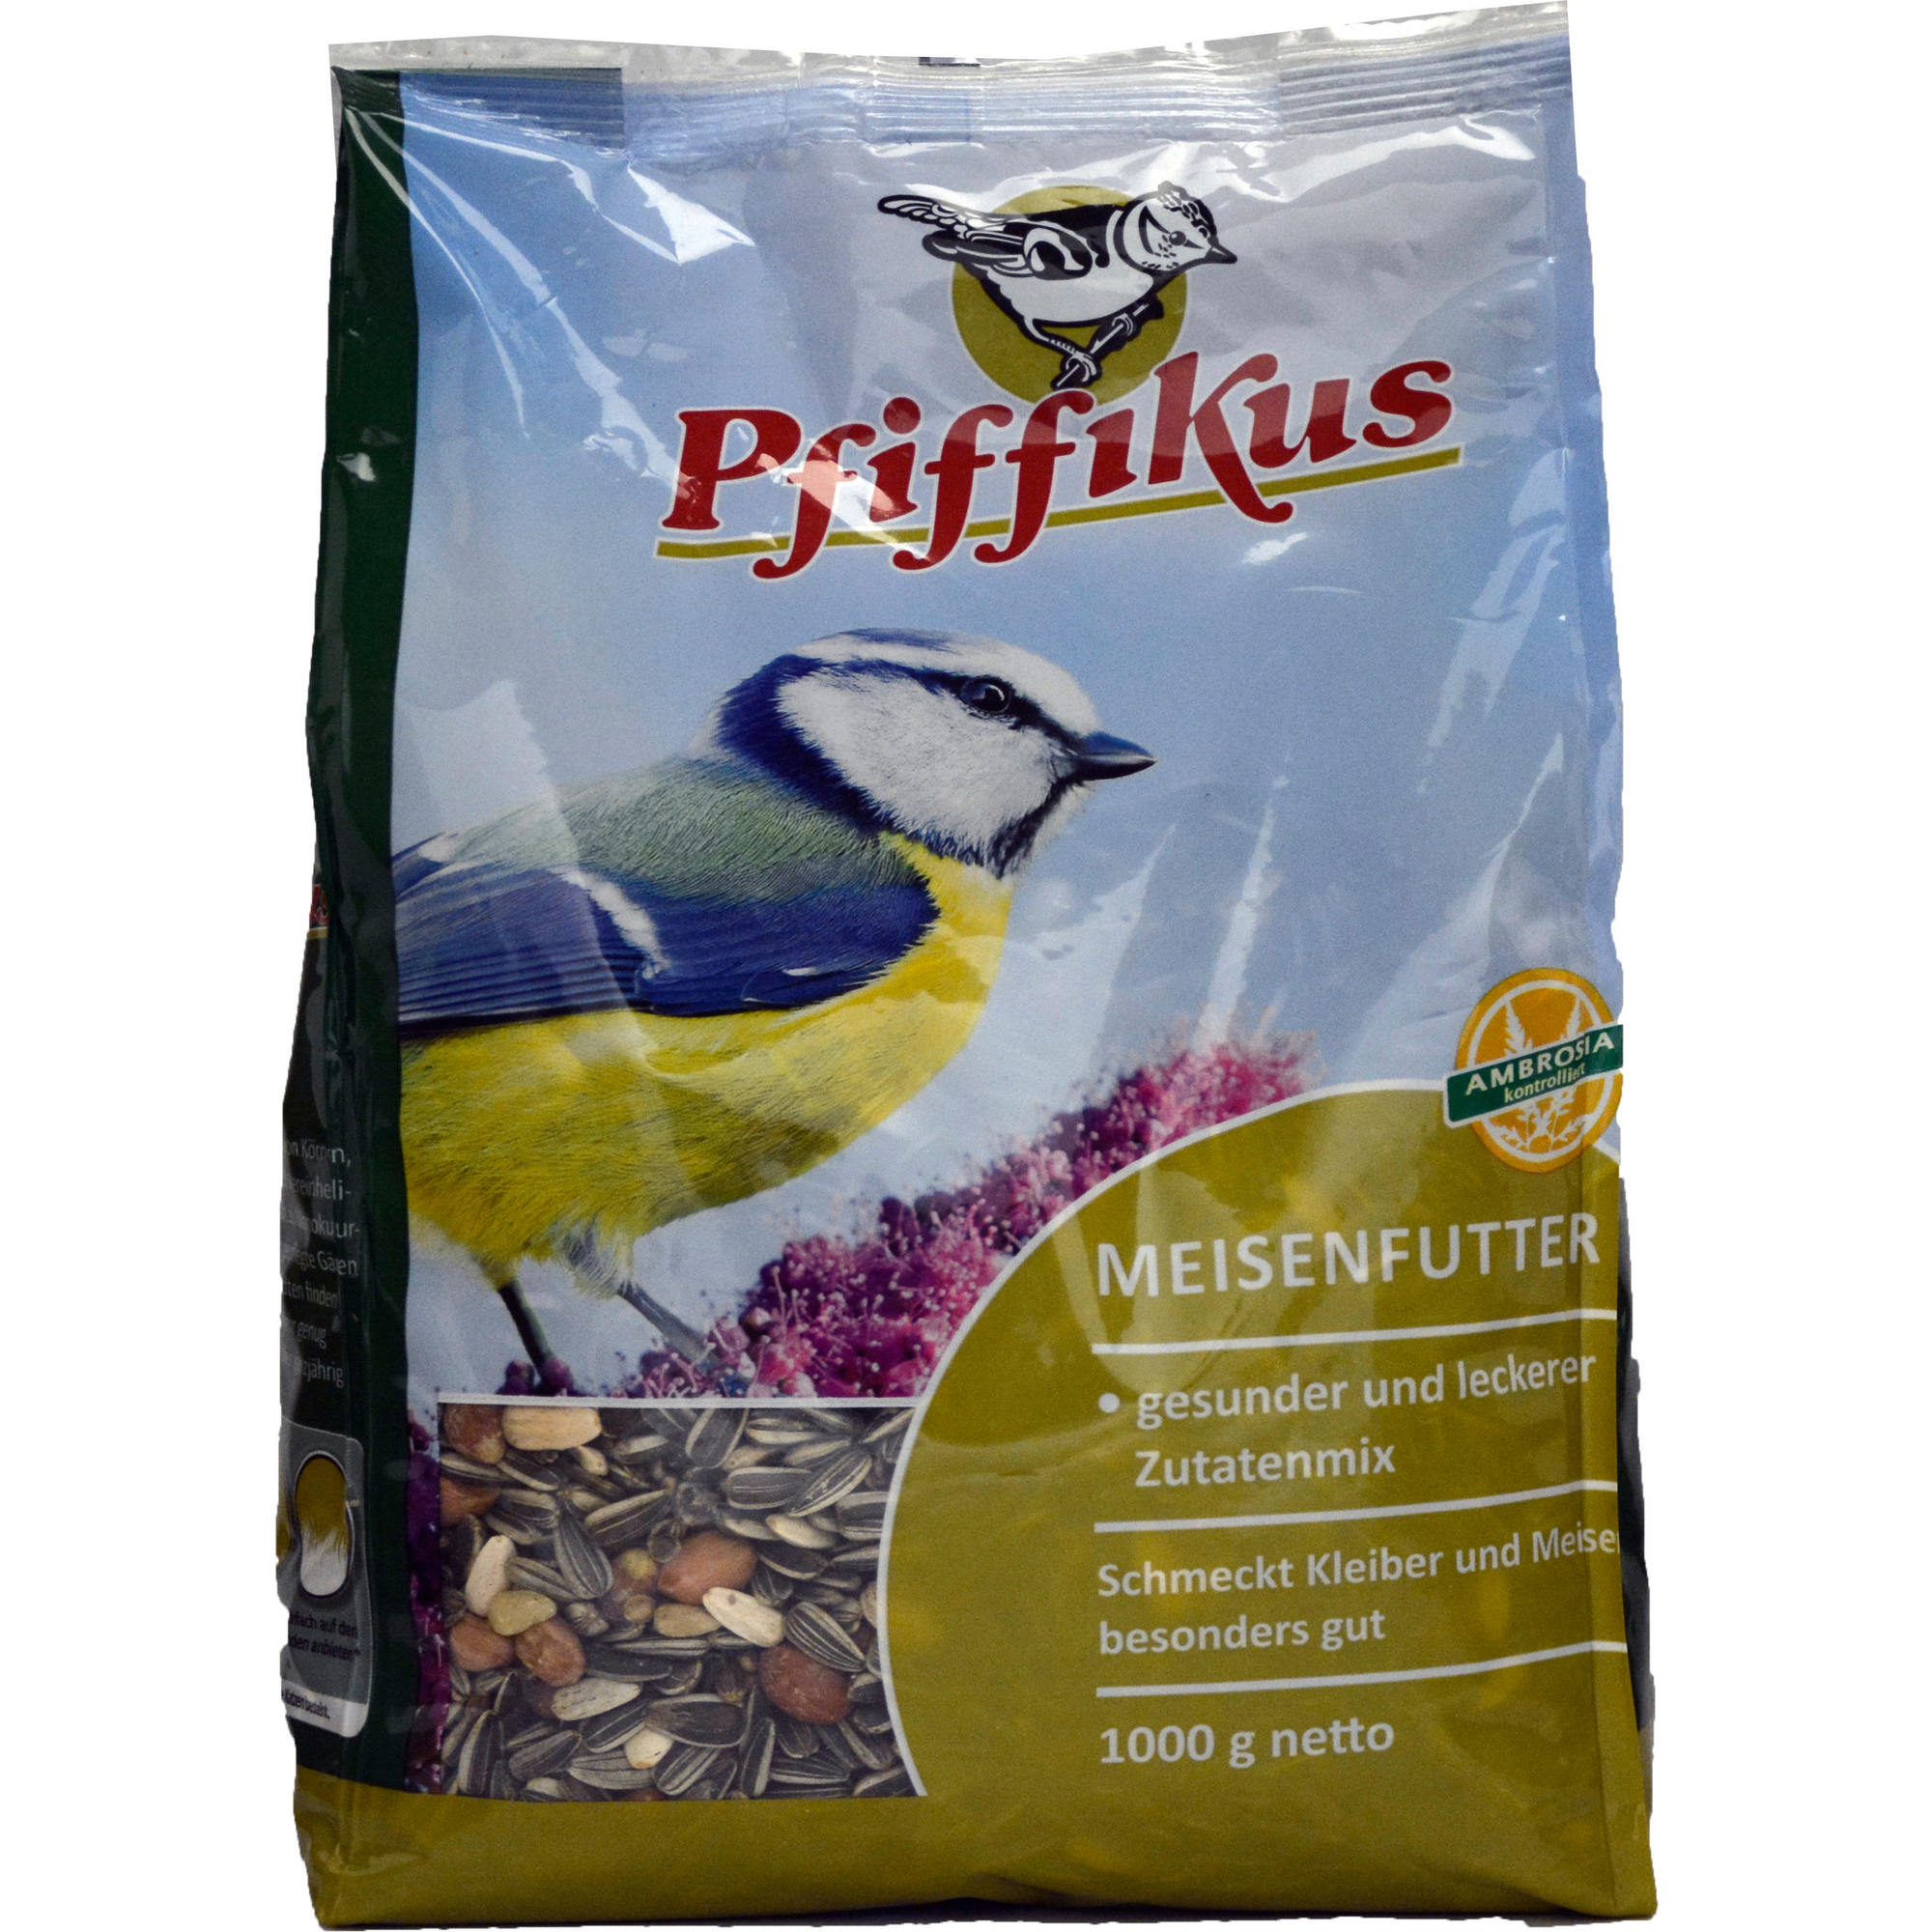 Meisenfutter 1,0 kg + product picture